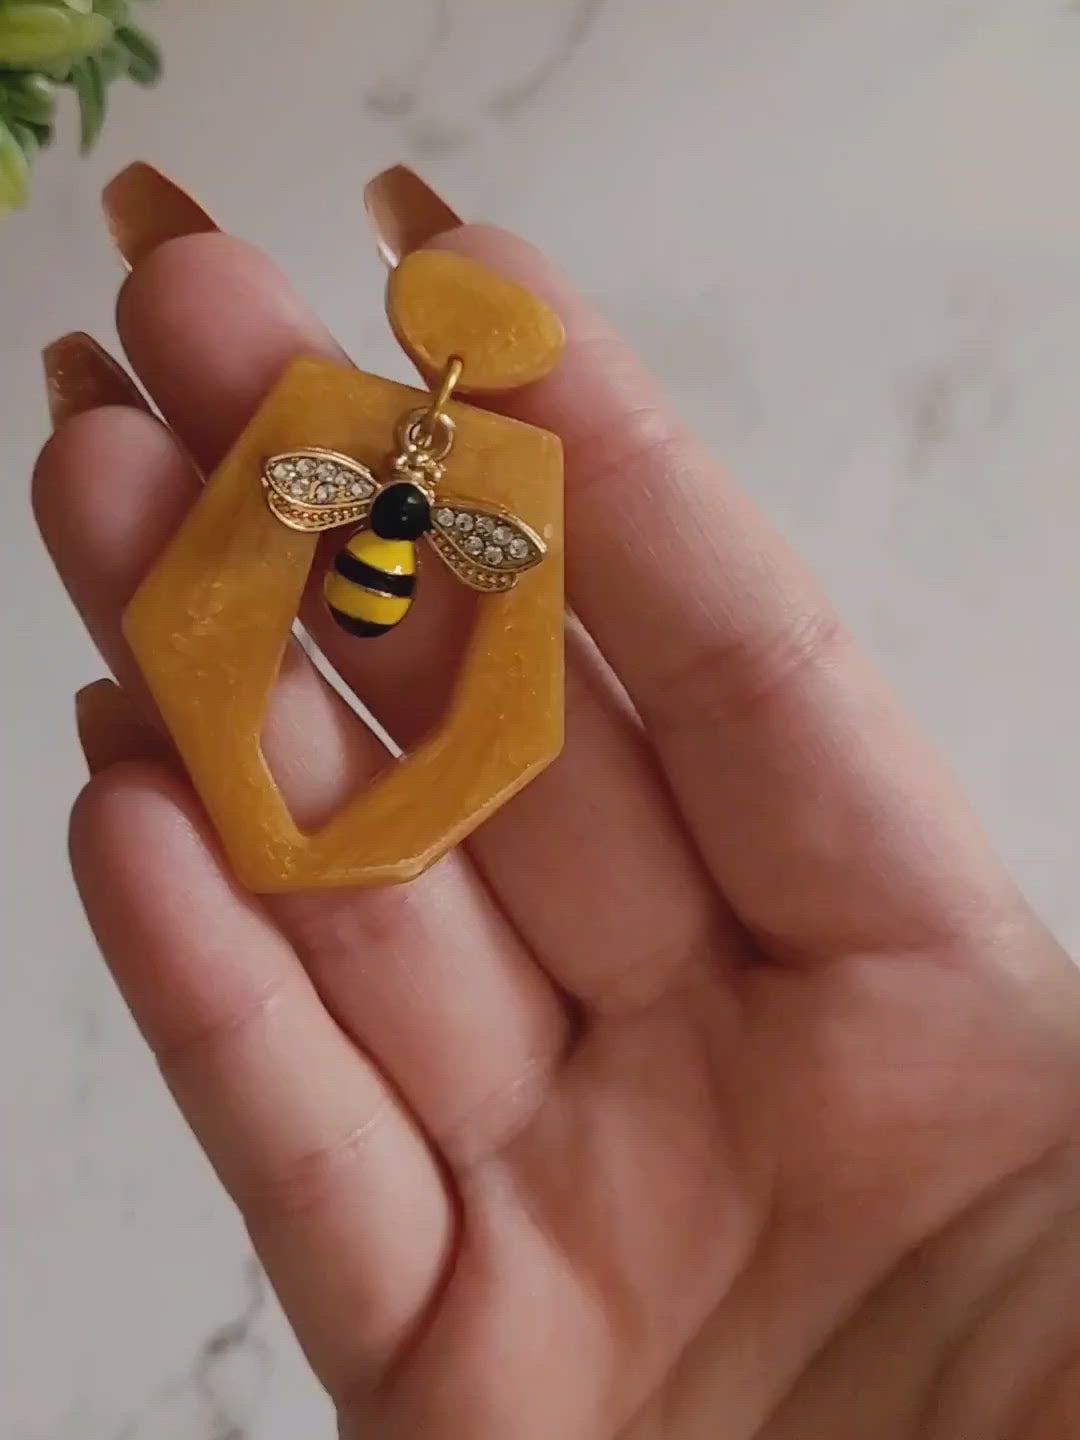 Close up of hexagon shaped resin earring with bee charm in a hand to show size and color detail. 